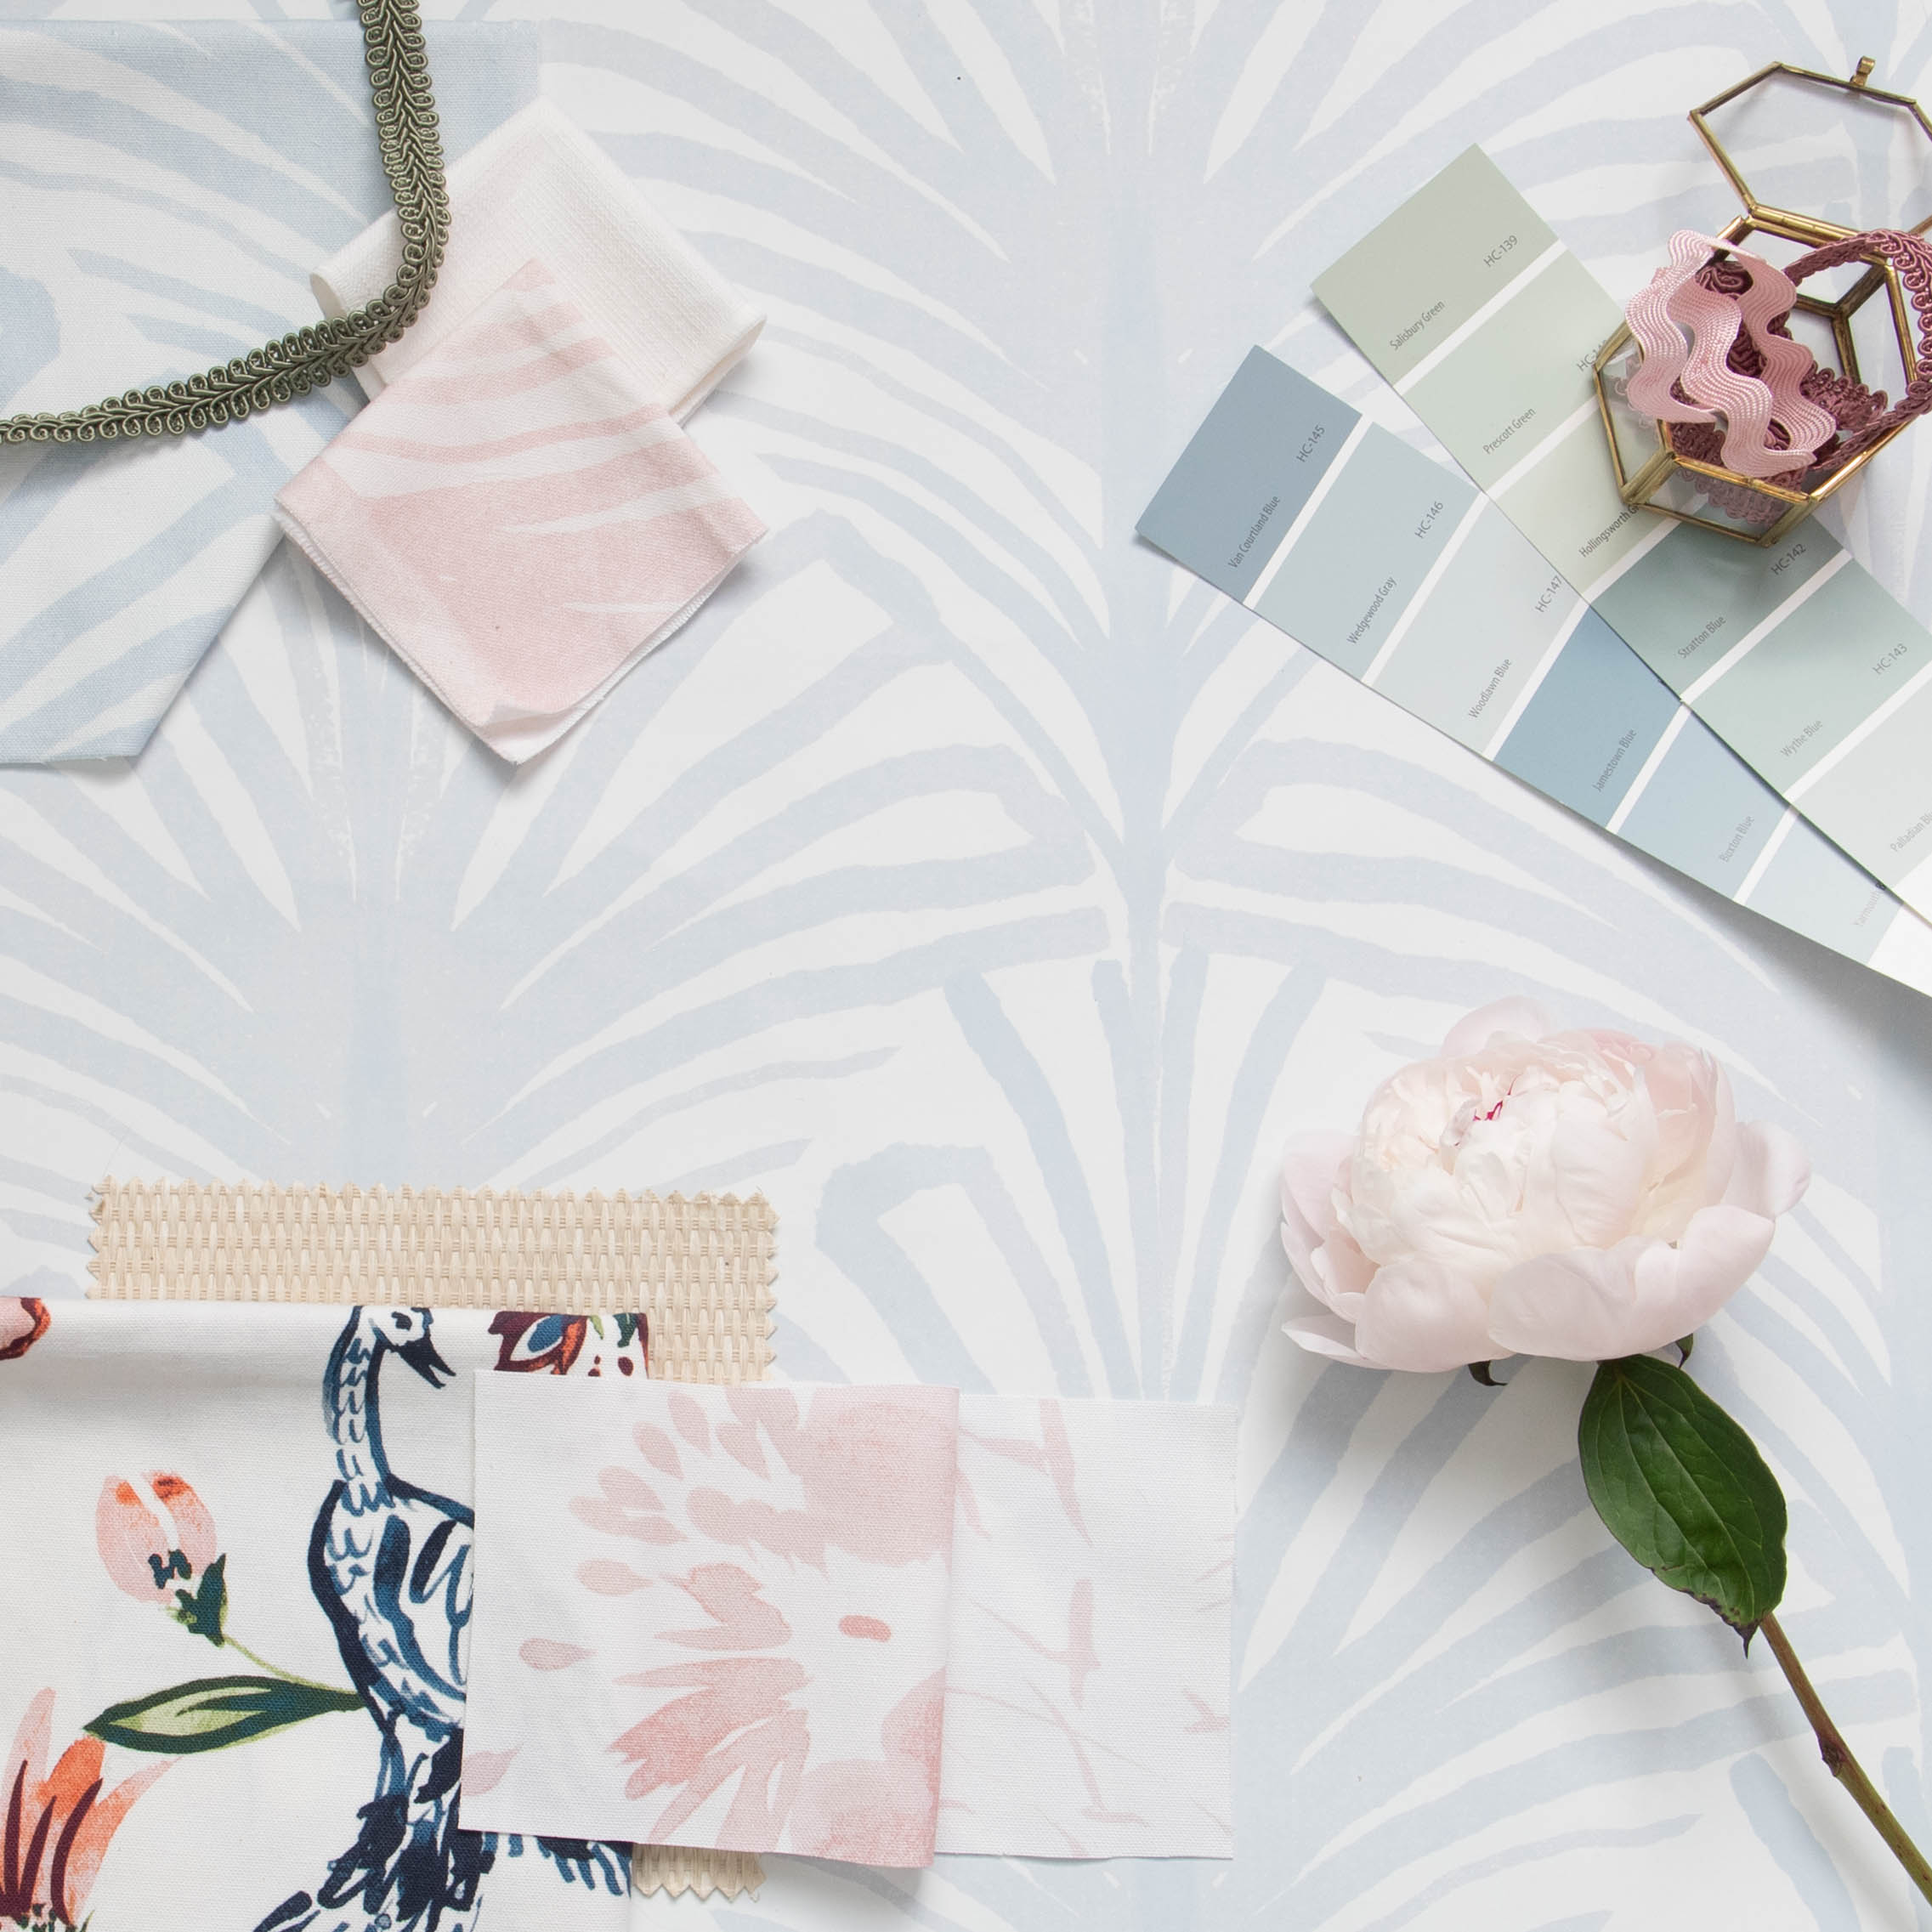 Interior design moodboard and fabric inspirations with Sky Blue Palm wallpaper, Sky Blue Palm printed cotton swatch, Rose Pink Palm printed cotton swatch, and Cream Chinoiserie printed cotton swatch